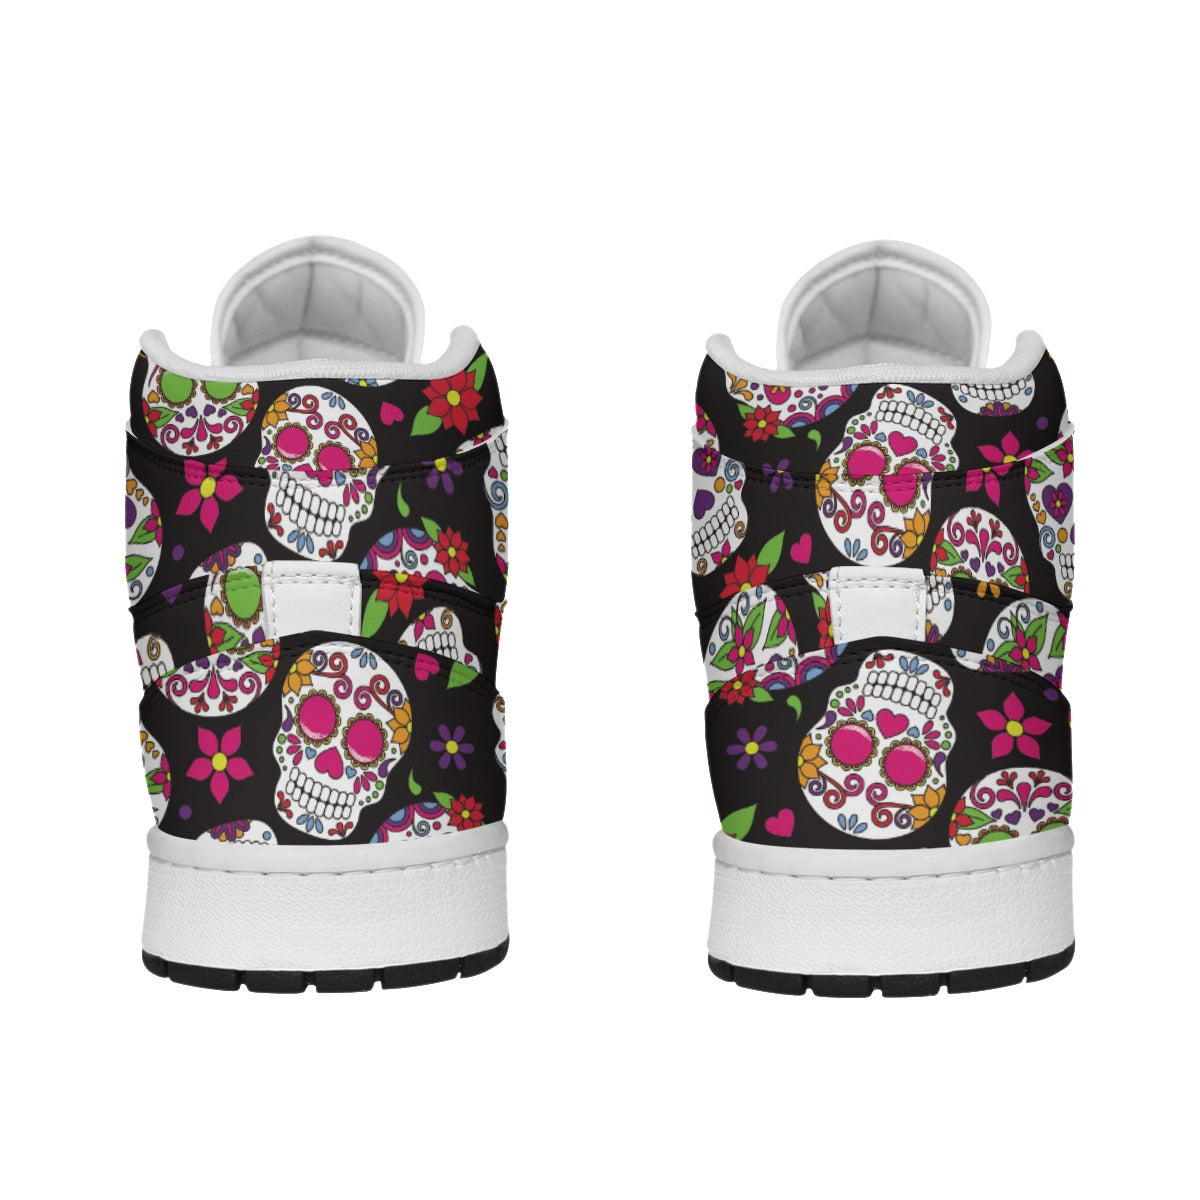 Sugar skull Day of the dead Women's Synthetic Leather Stitching Shoes